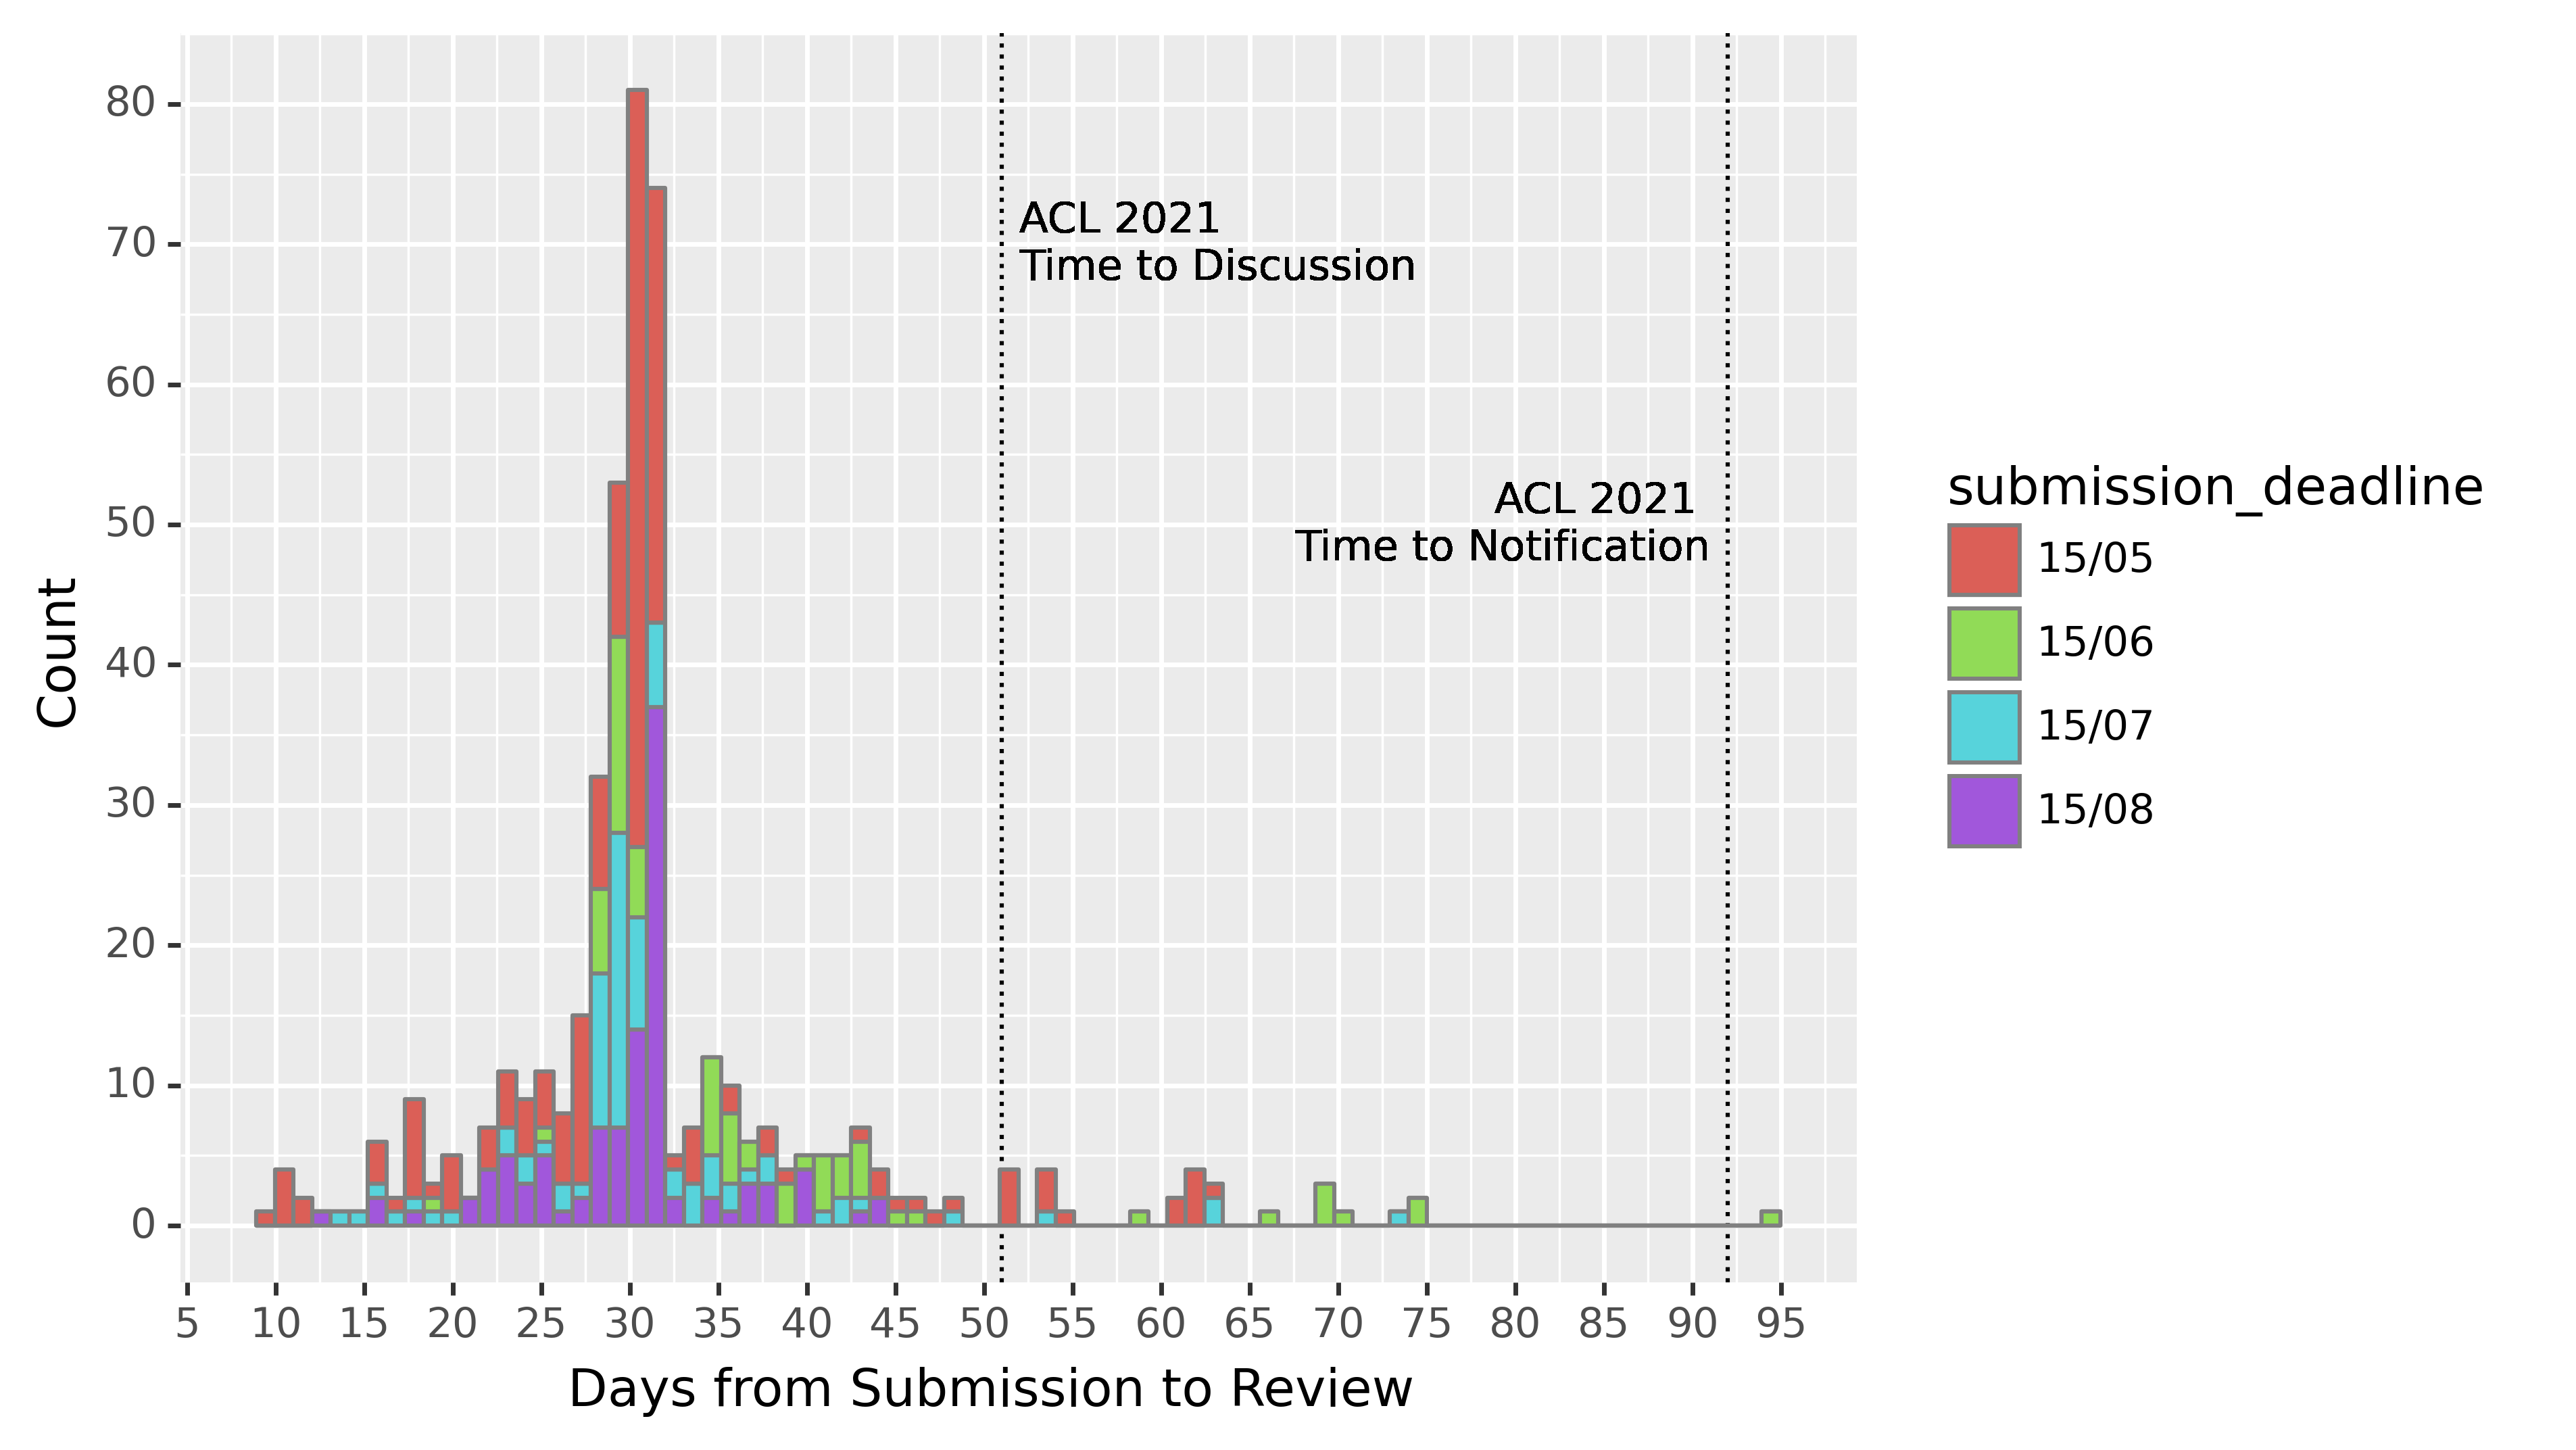 Days from Submission to Review